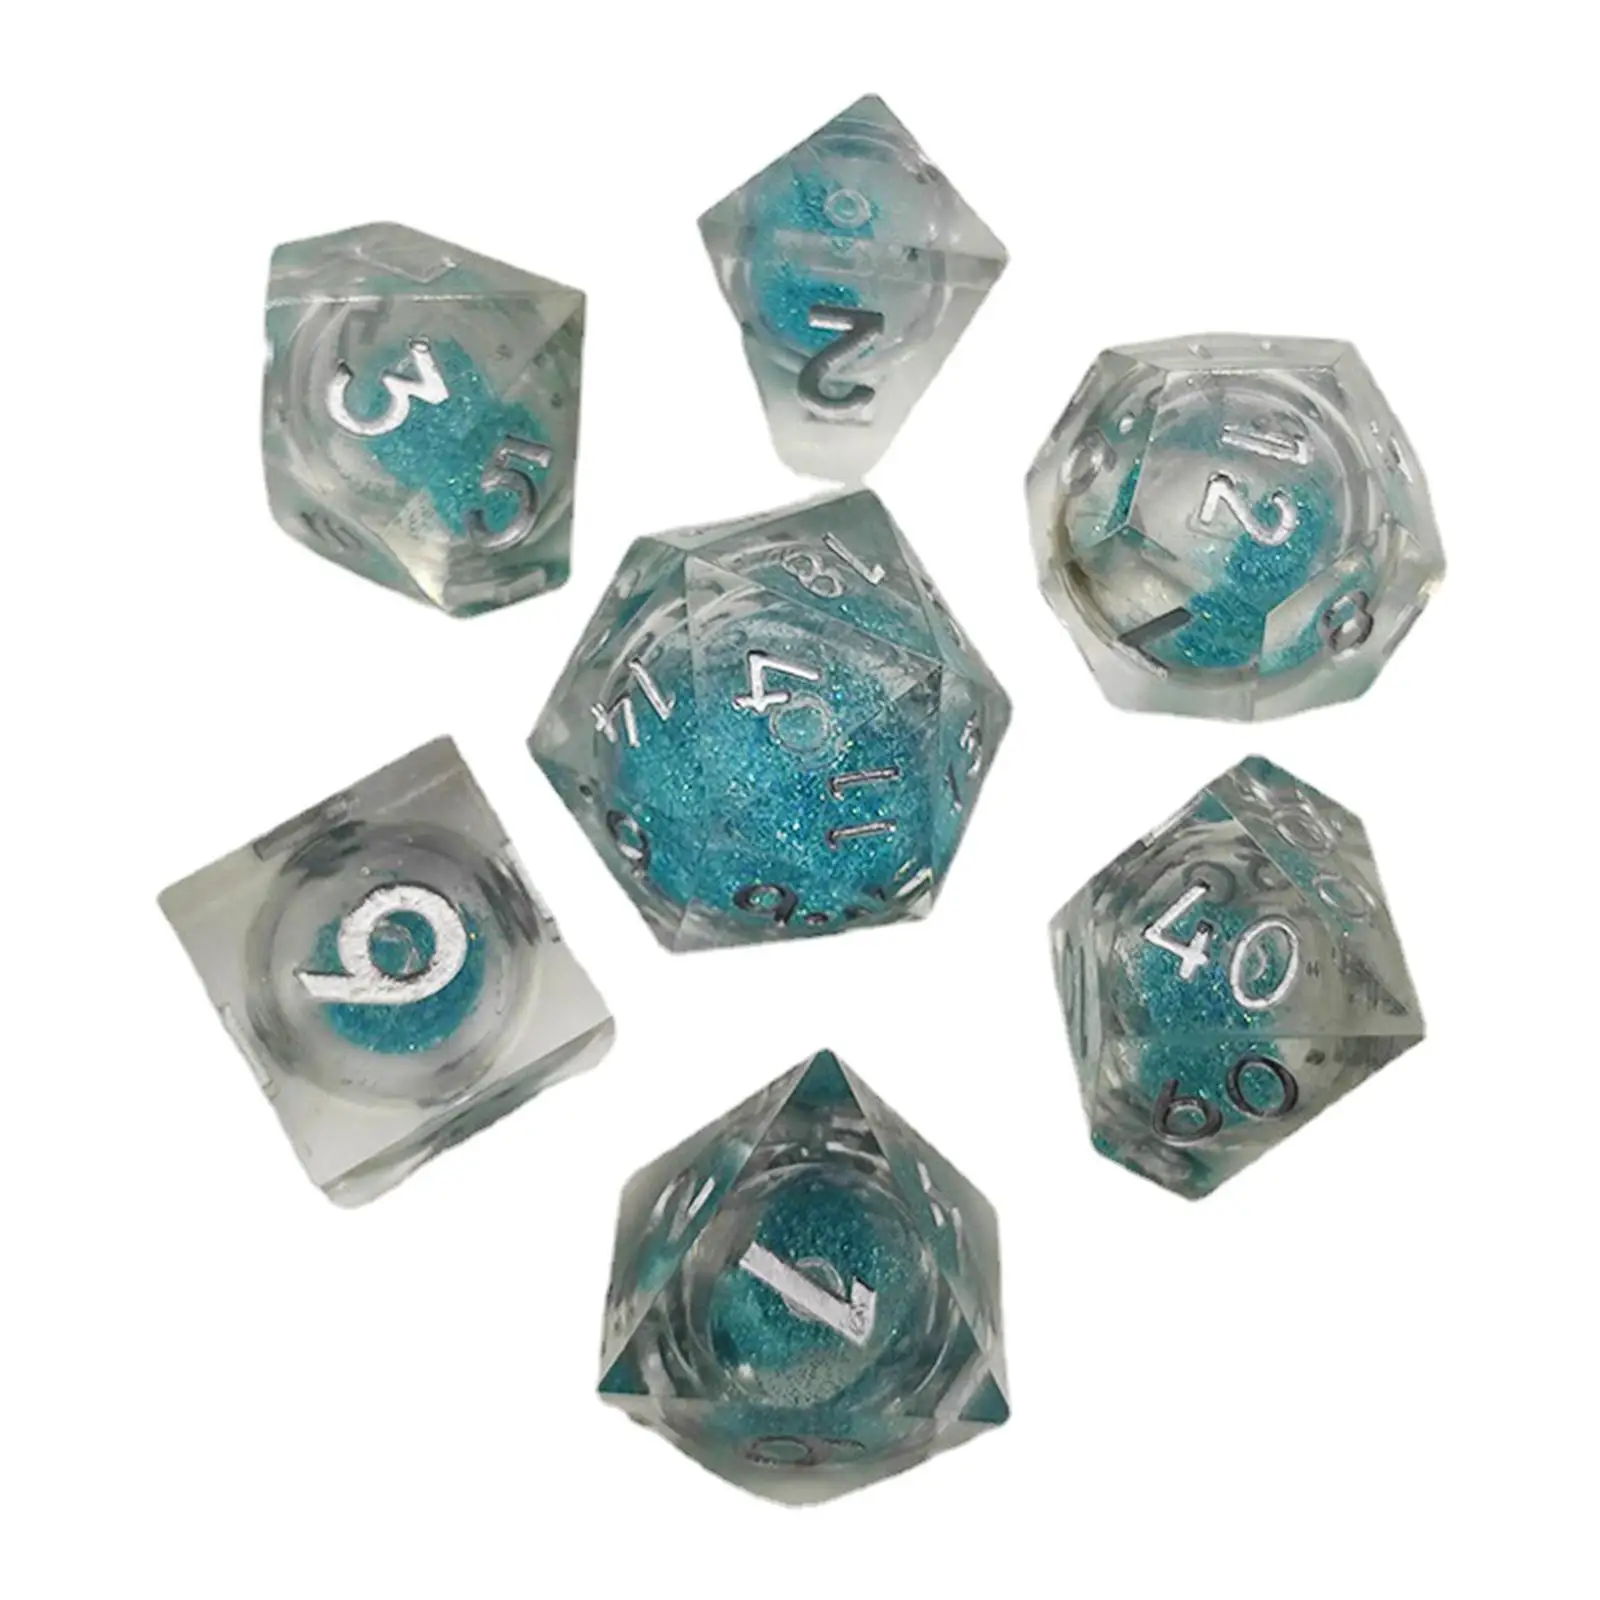 7x Acrylic Multi Sided Dice Play Gaming Dice for DND Party Favors Board Game